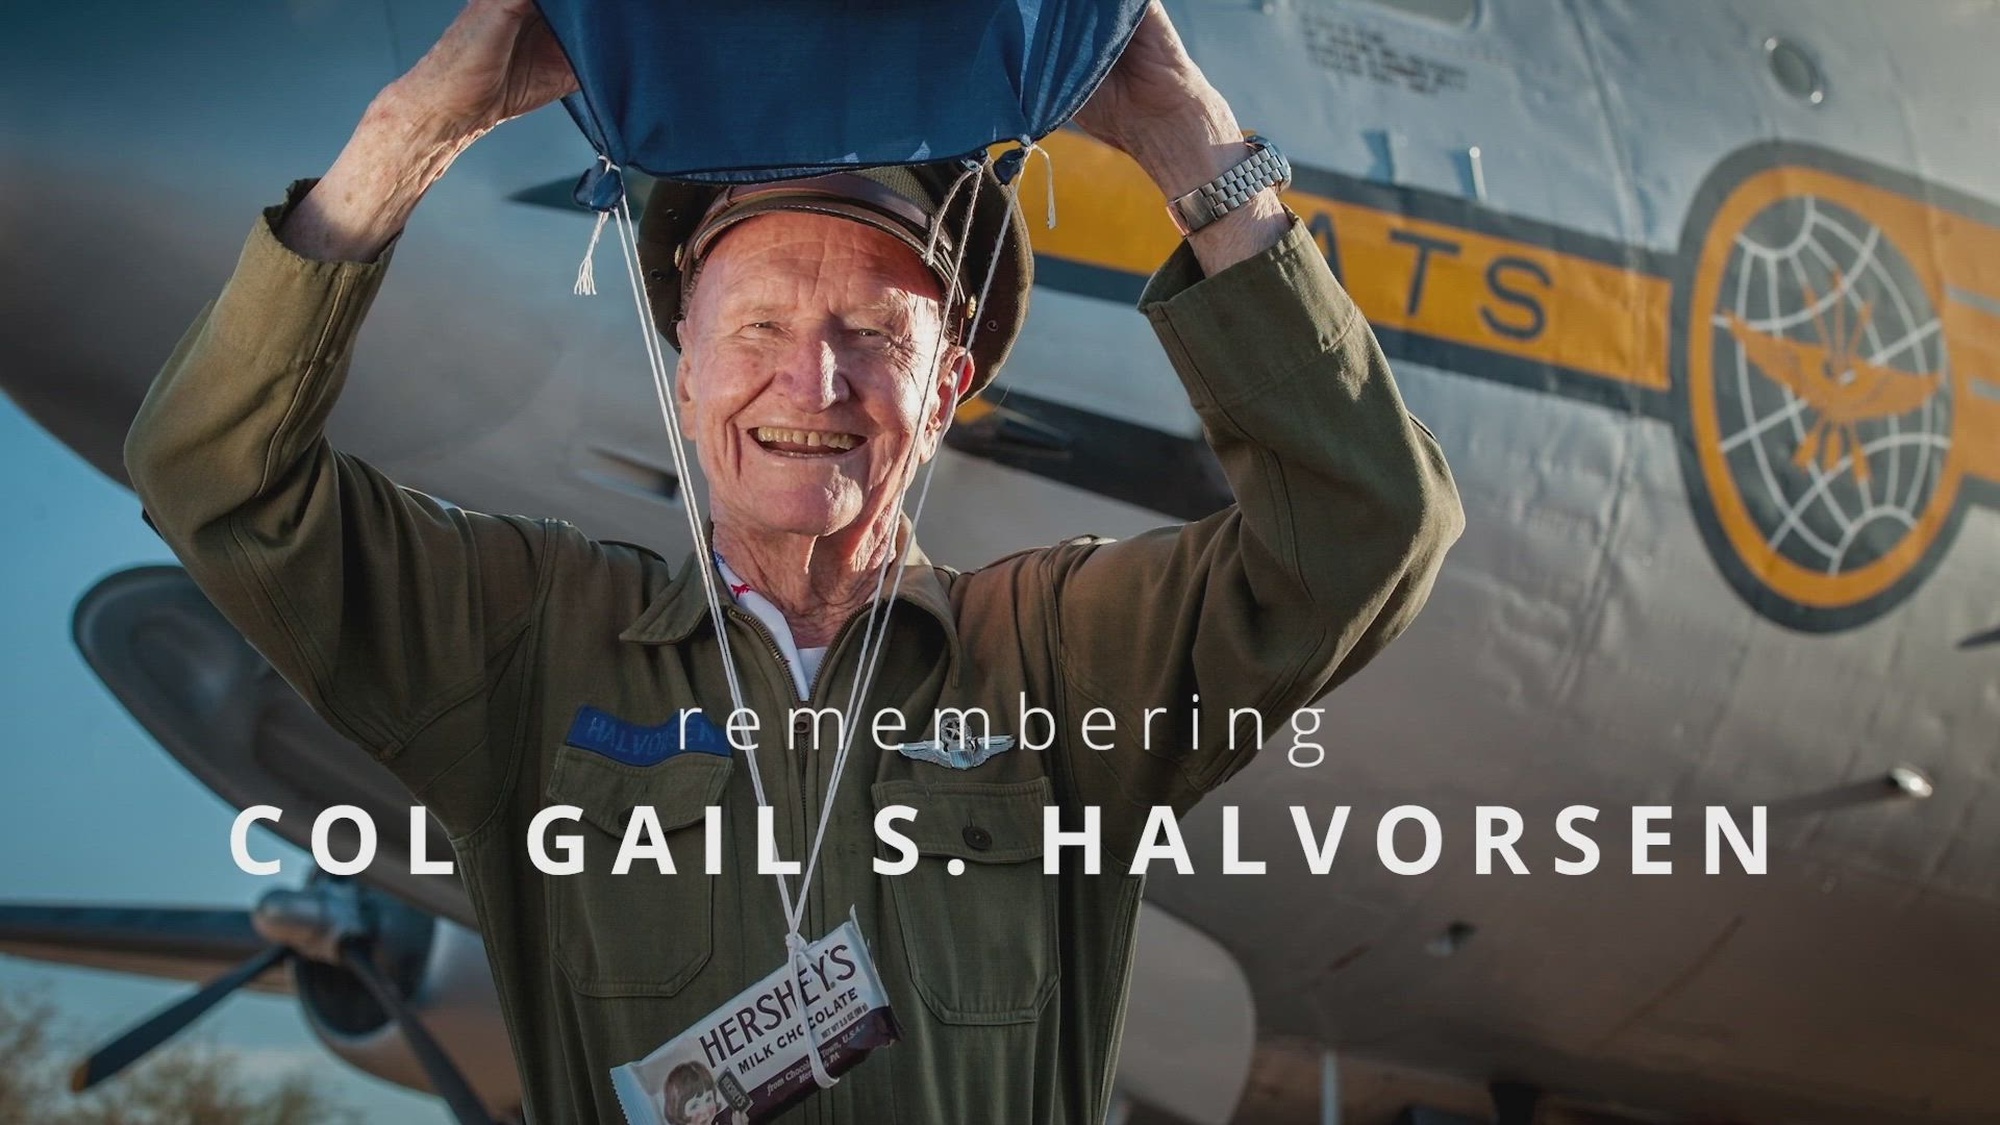 Col. (ret.) Gail S. Halvorsen, known as the Candy Bomber, is remembered for his service, excellence and integrity. Following his passing in February 2022, Air Mobility Command dedicated a C-17 Globemaster III from Charleston Air Force Base, S.C., in his honor. Additional footage and interviews provided by 15th Wing Public Affairs, 375th Air Mobility Wing Public Affairs, Air Mobility Command Public Affairs and 151st Air Refueling Wing Public Affairs.